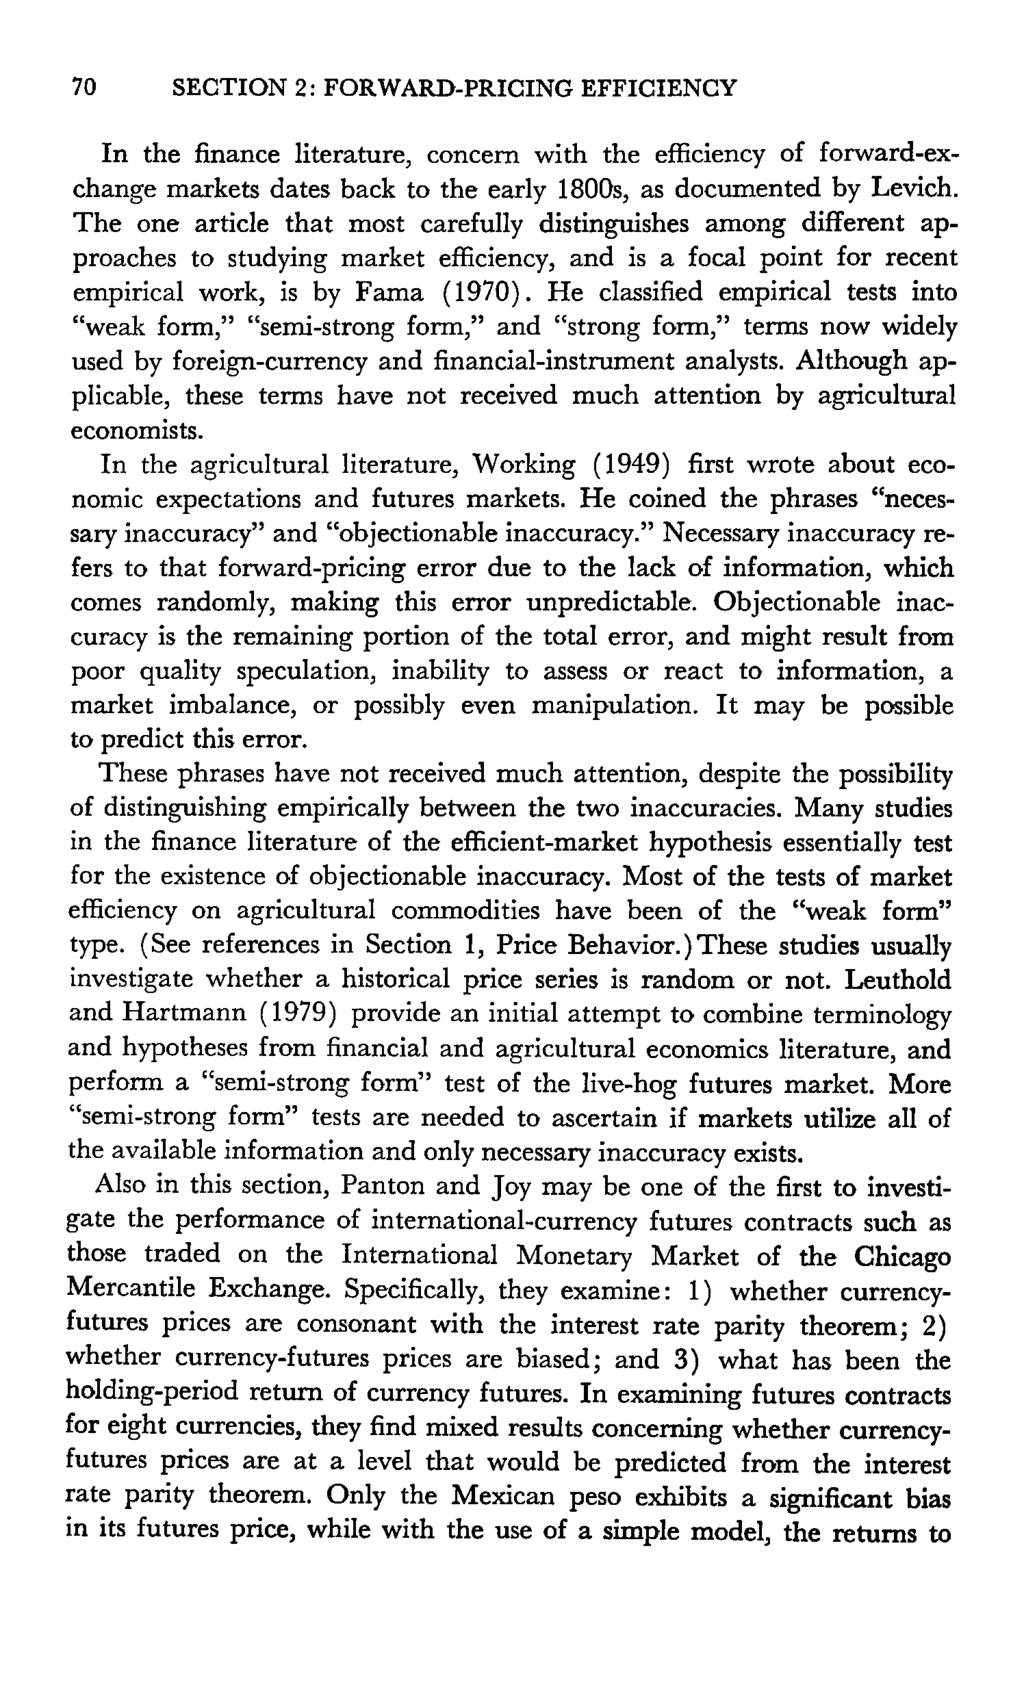 0 SECTION 2: FORWARD-PRICING EFFICIENCY In the finance literature, concern with the efficiency of forward-exchange markets dates back to the early 800s, as documented by Levich.